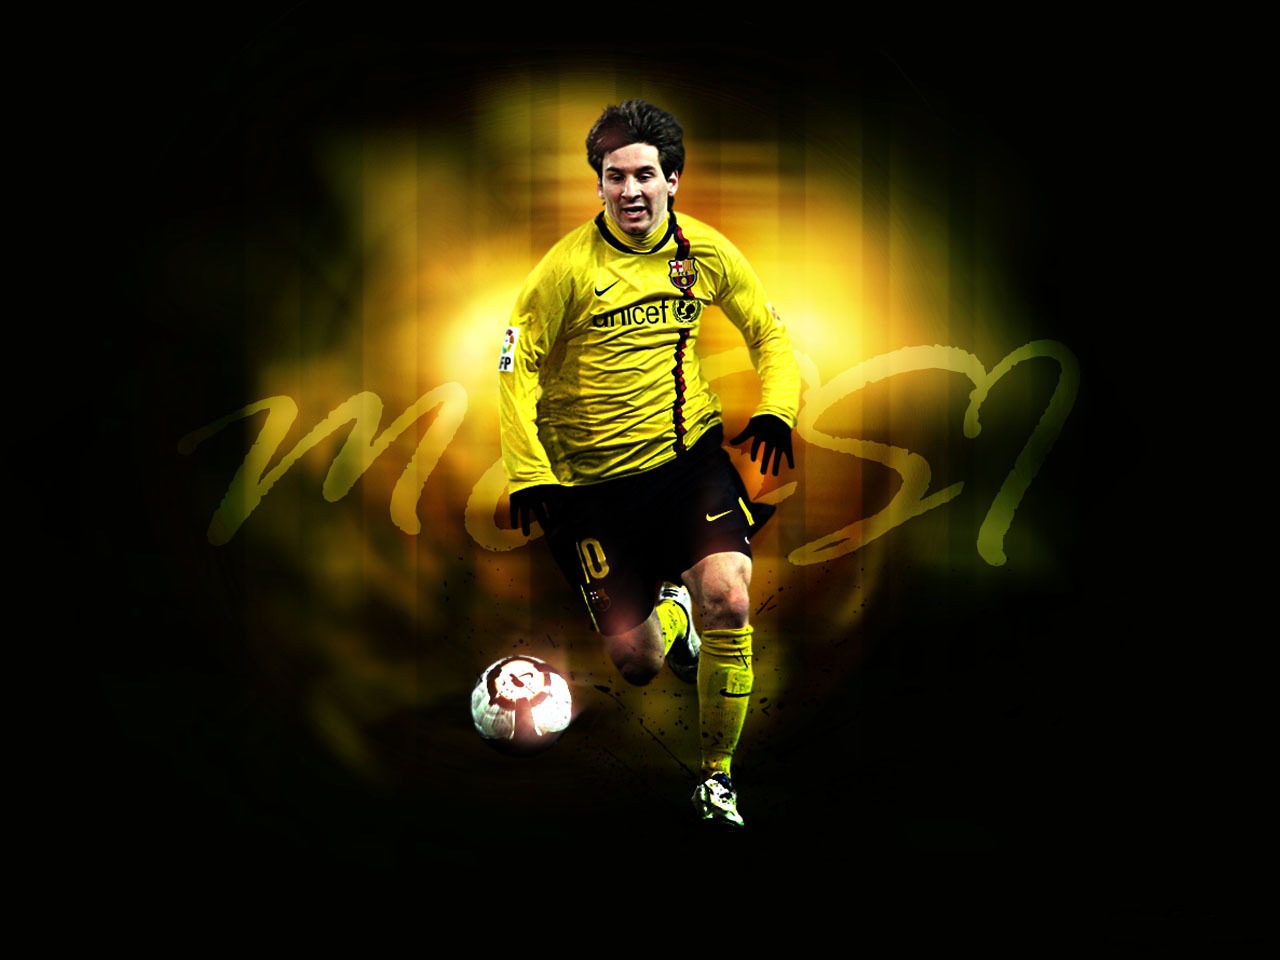 All Wallpapers: Lionel Messi hd New Nice Wallpapers 2013